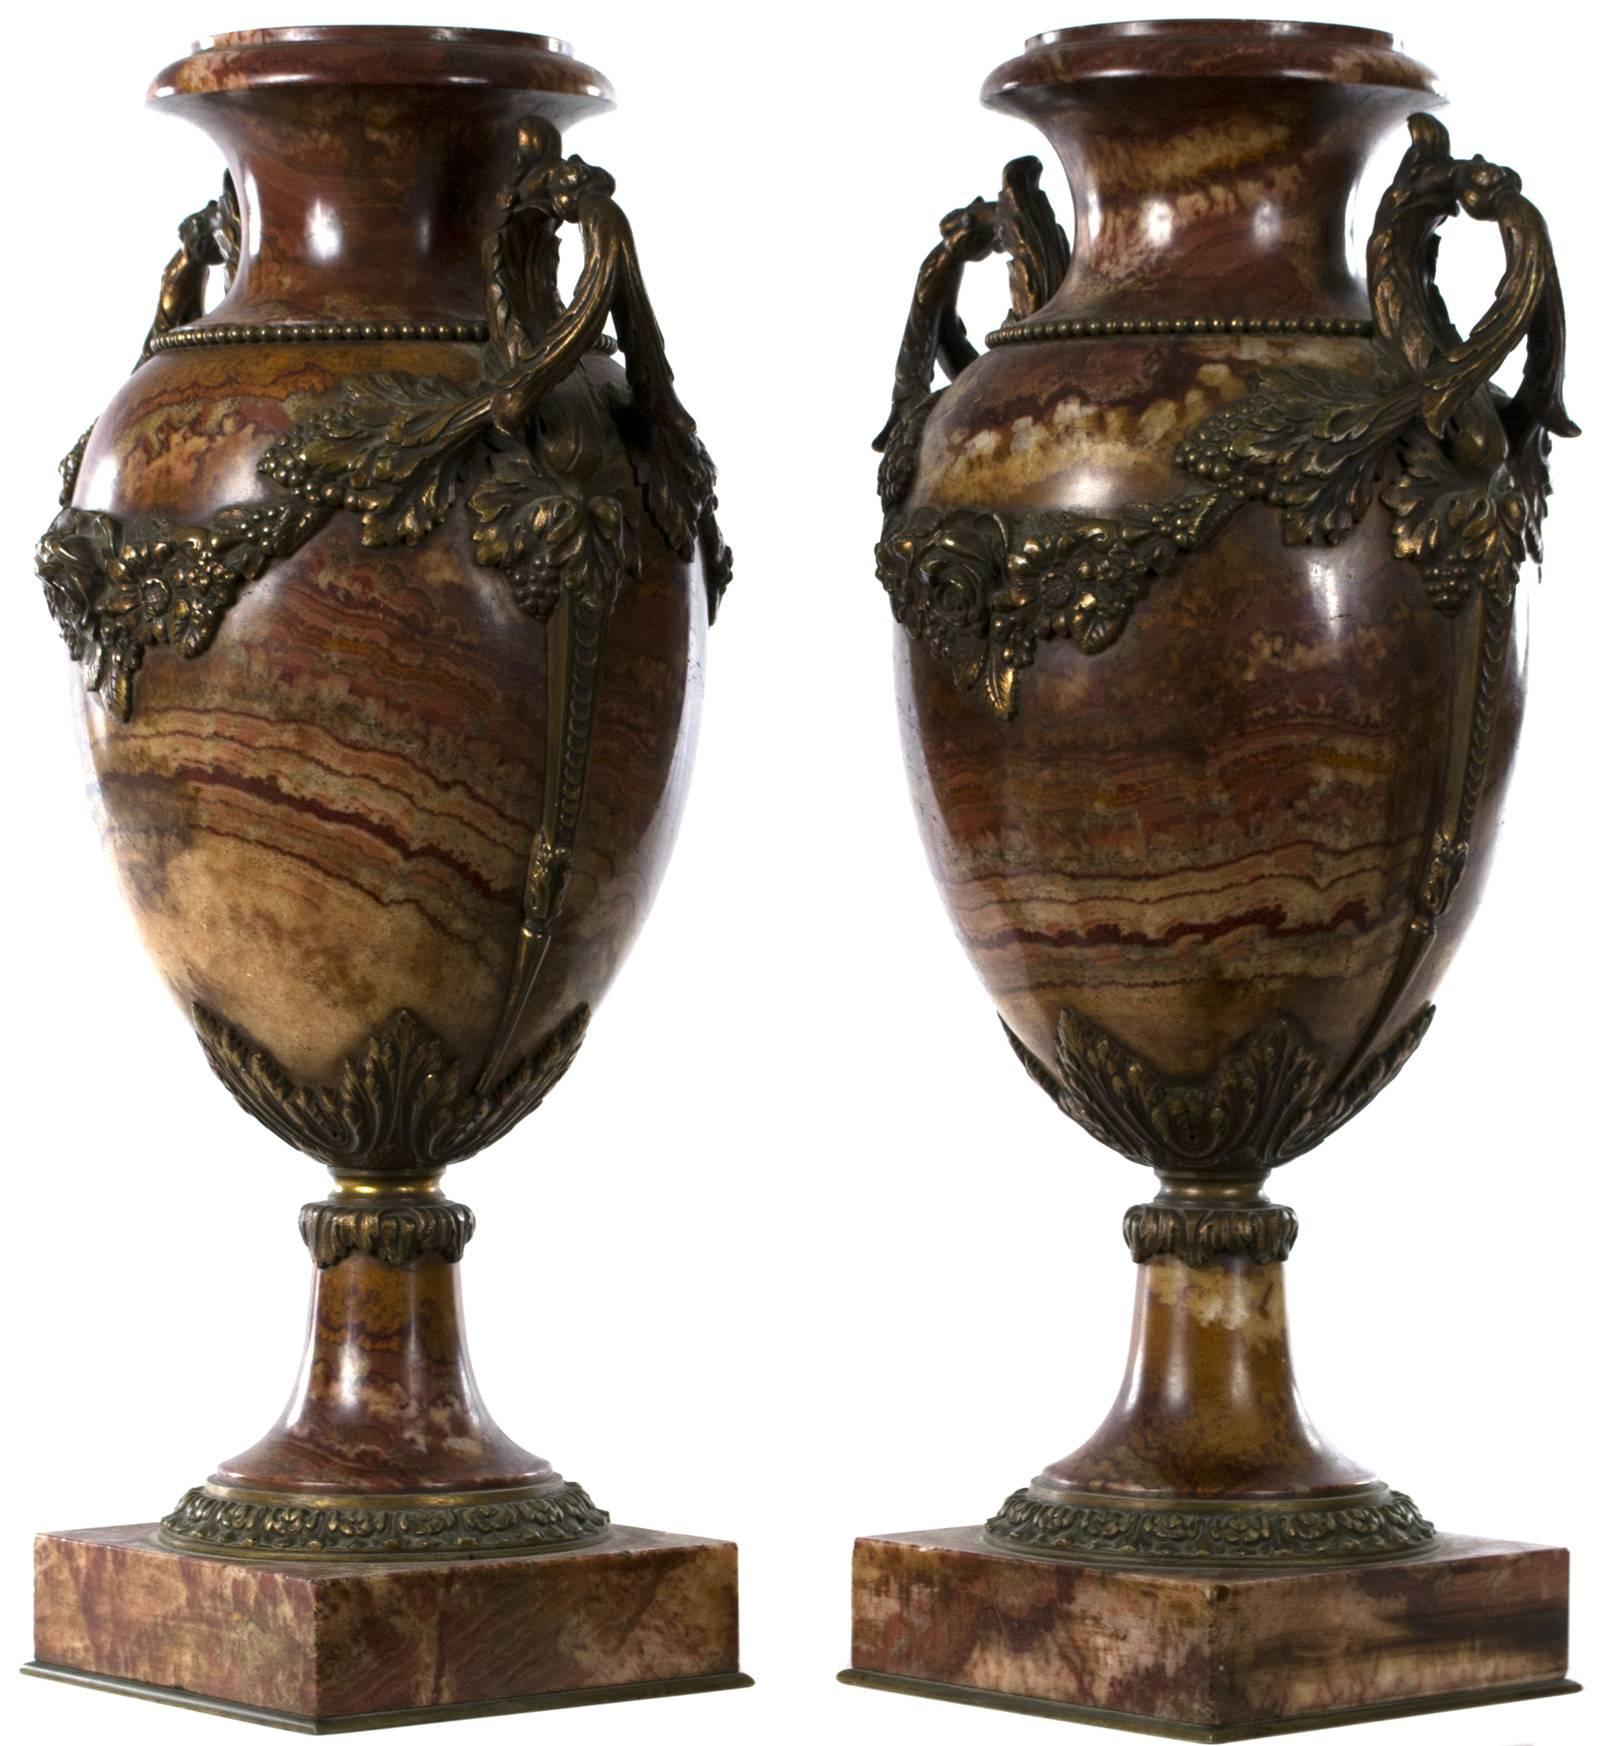 Two richly colored marble urns with elaborate hand-chased and gilt bronze appliqué handles and wreaths, made in France and dating to the third quarter of the nineteenth century.